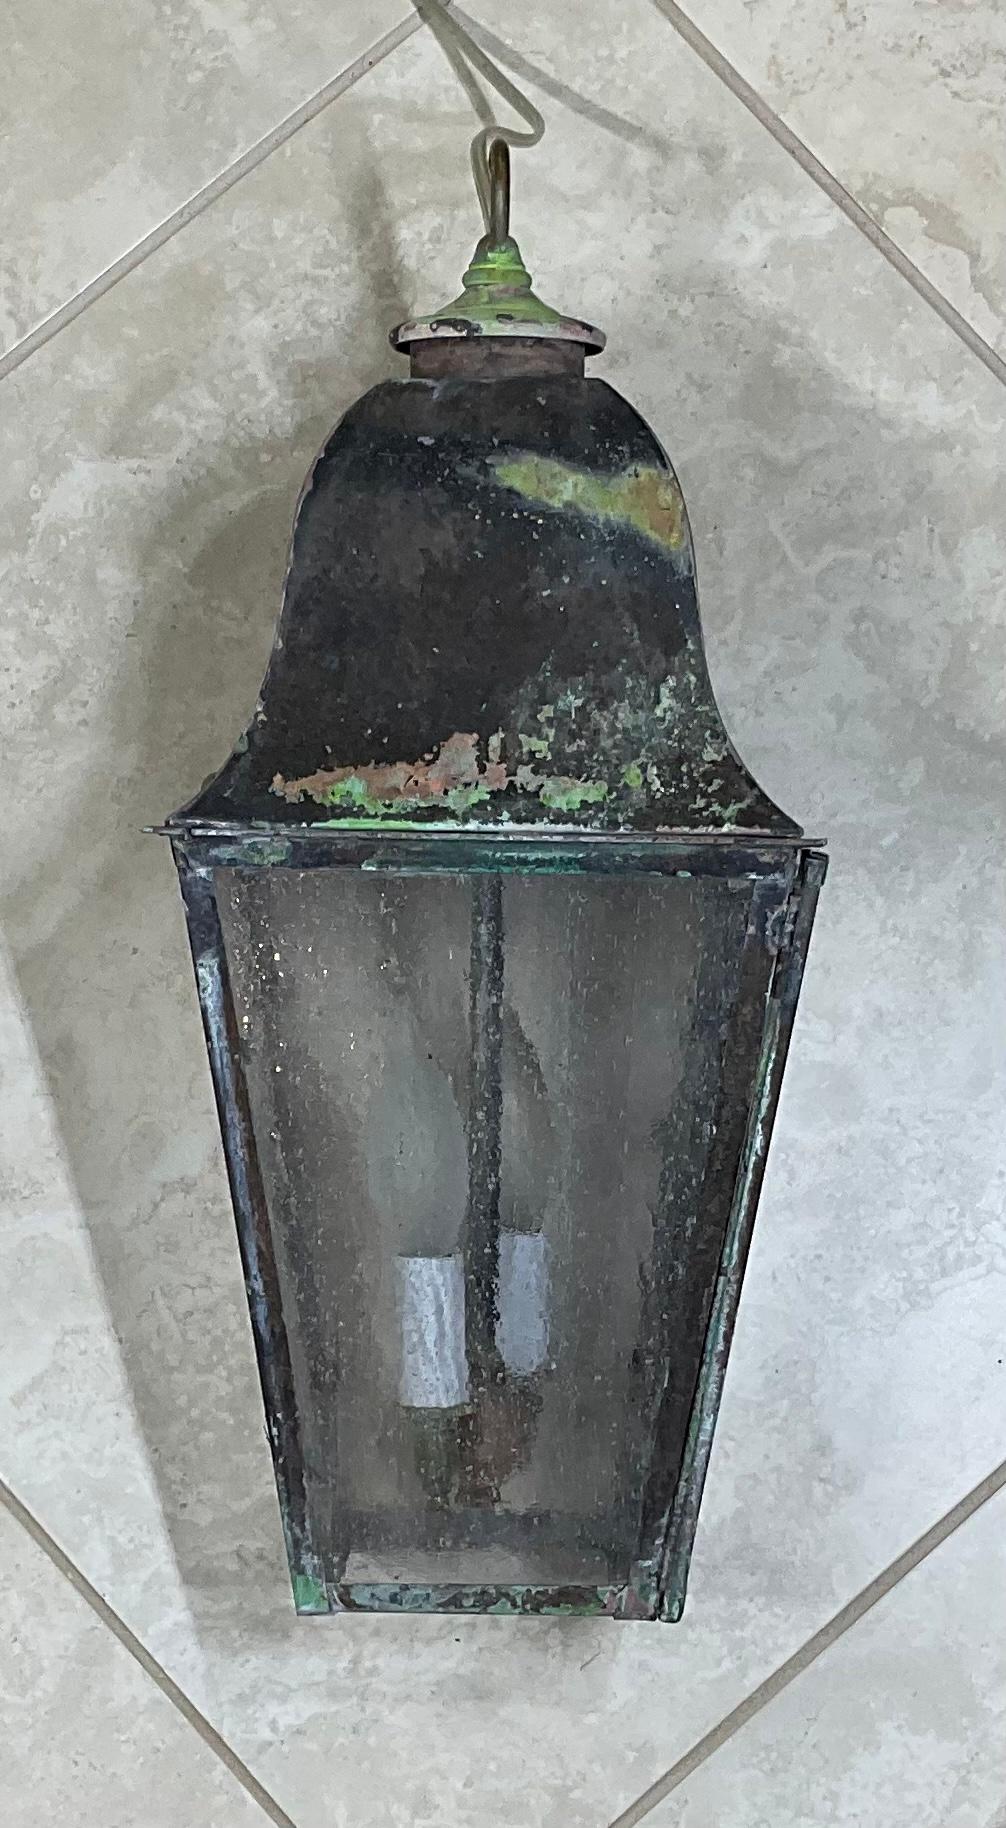 Elegant hanging lantern made of solid brass, with two 60 watt lights, suitable for wet locations ready to use, some oxidised patina ,and seeded glass.
Newly rewired and ready to use.
 